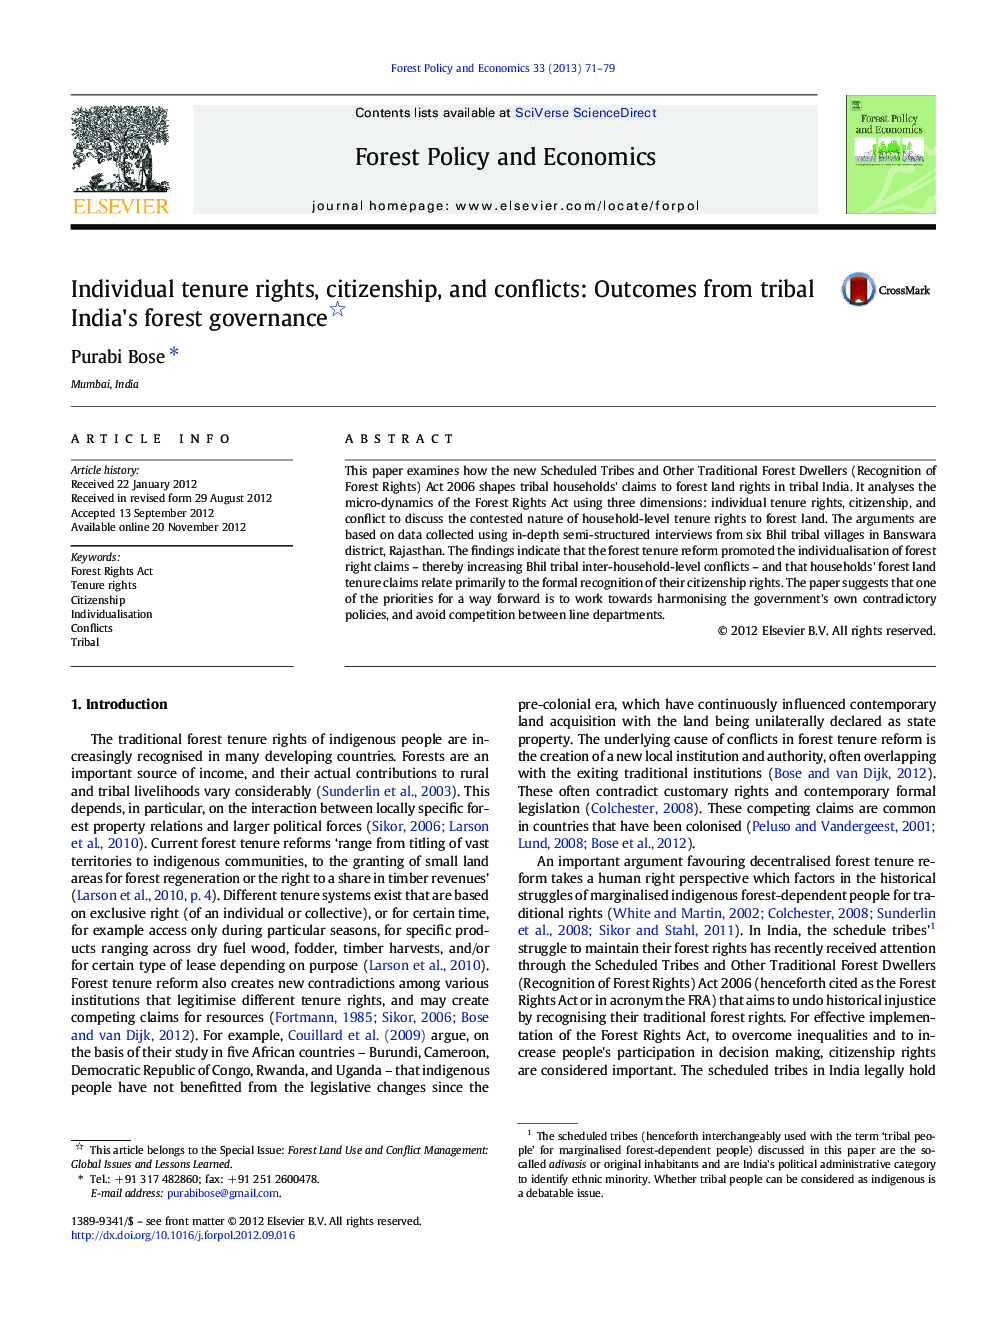 Individual tenure rights, citizenship, and conflicts: Outcomes from tribal India's forest governance